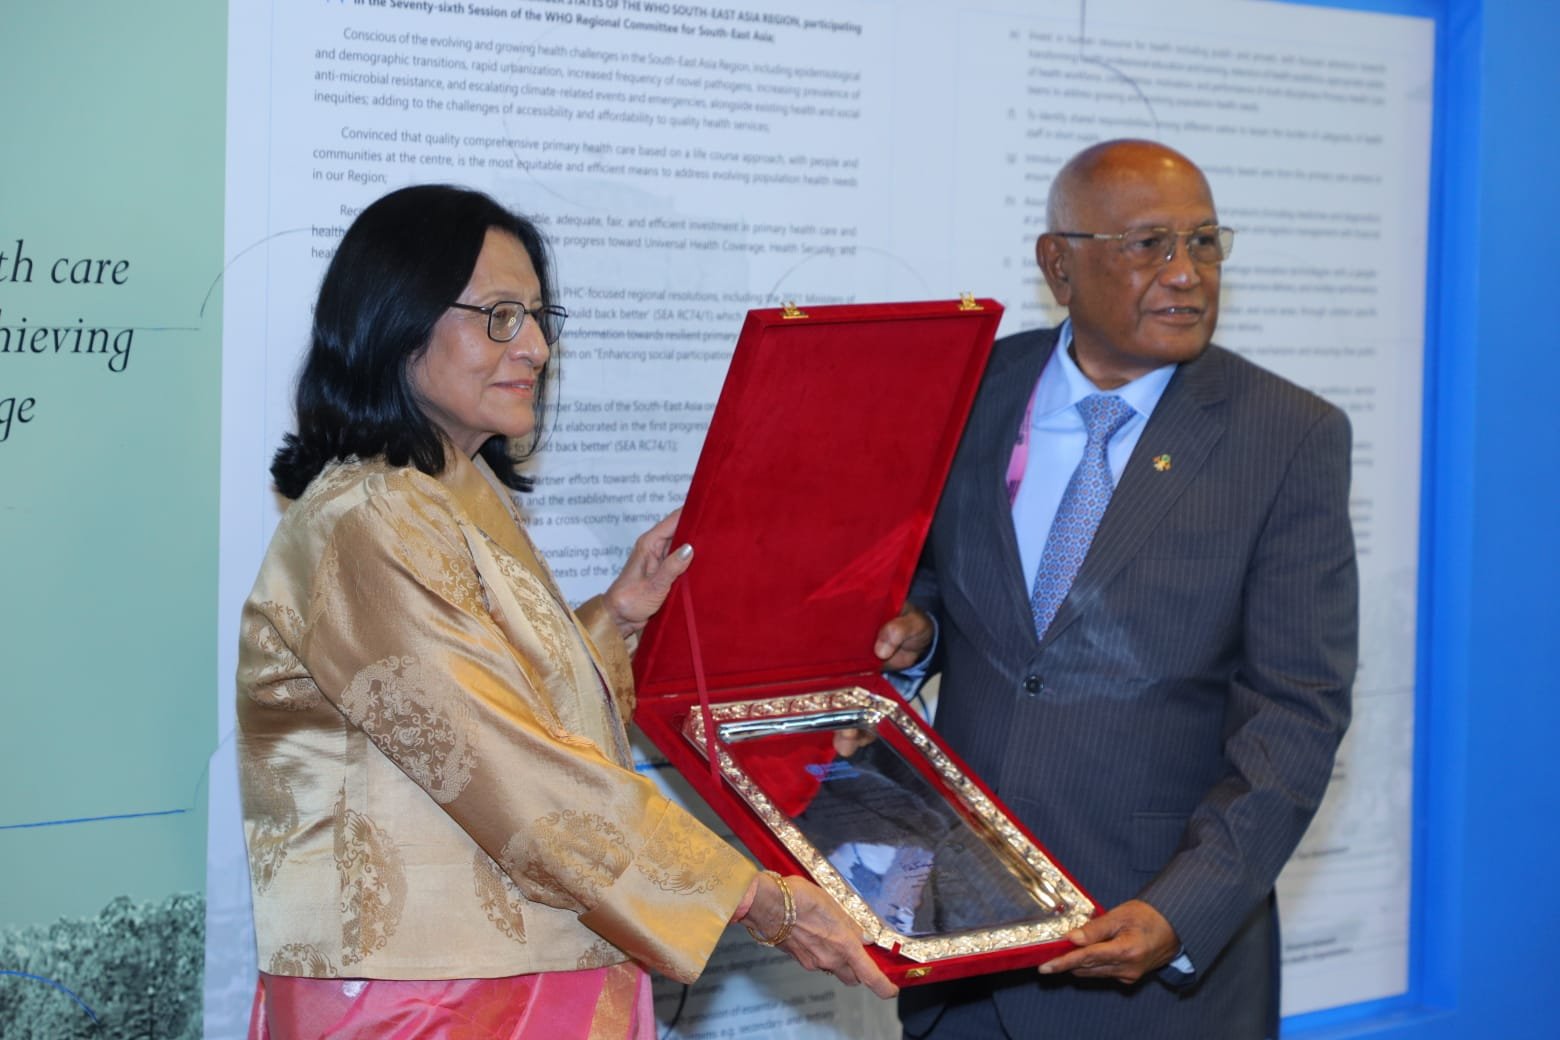 Dr Poonam Singh, Regional Director for WHO SEARO, presents an award to Minister of Health & Family Welfare for Maldives, Ahmed Naseem